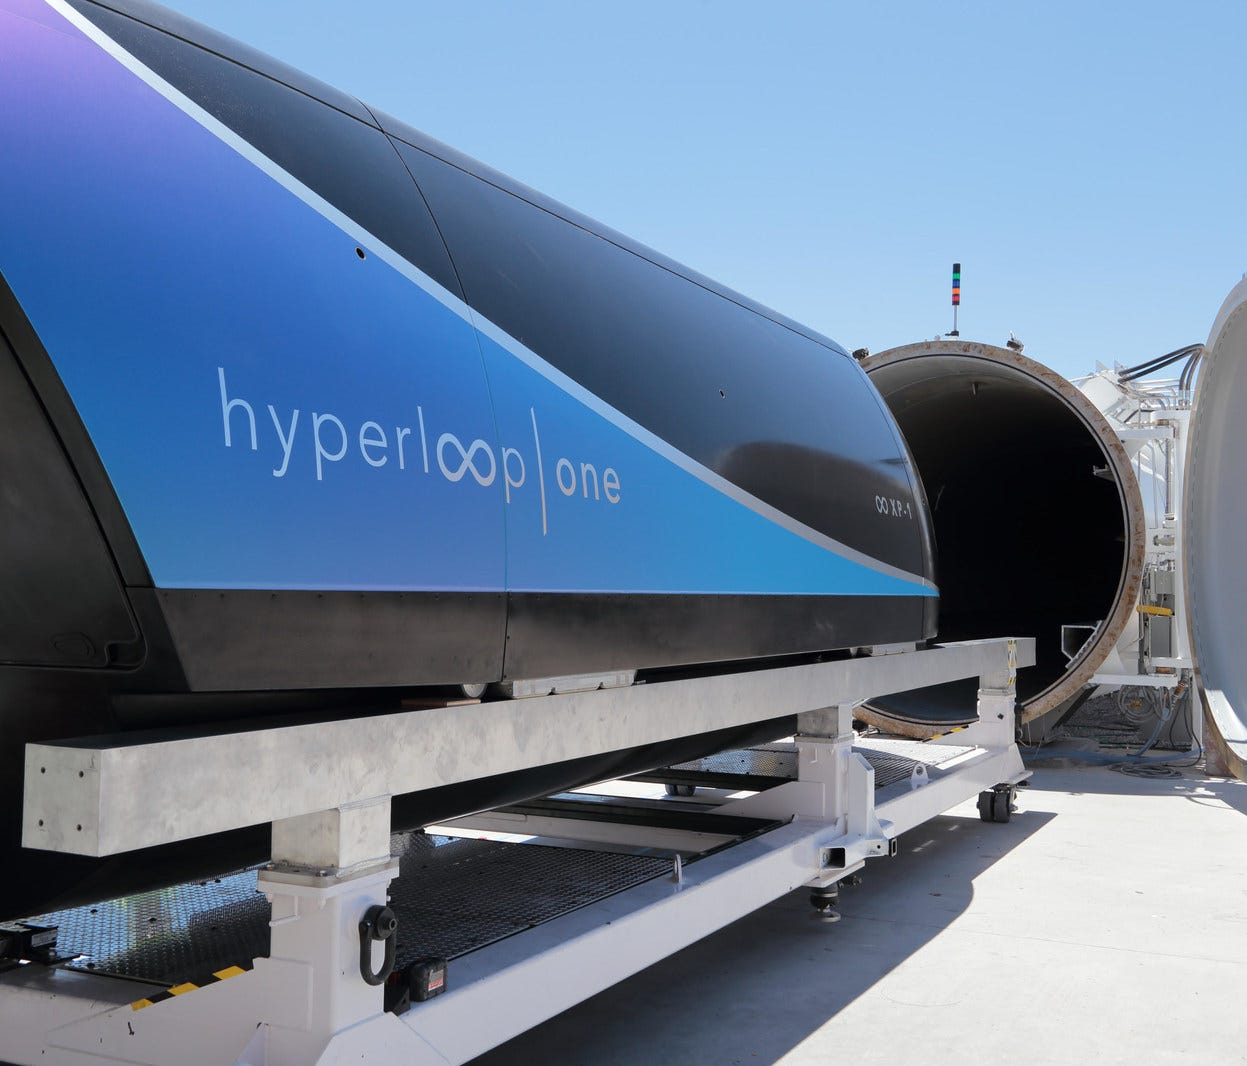 Hyperloop One's test pod just hit nearly 200 mph in the Nevada desert.